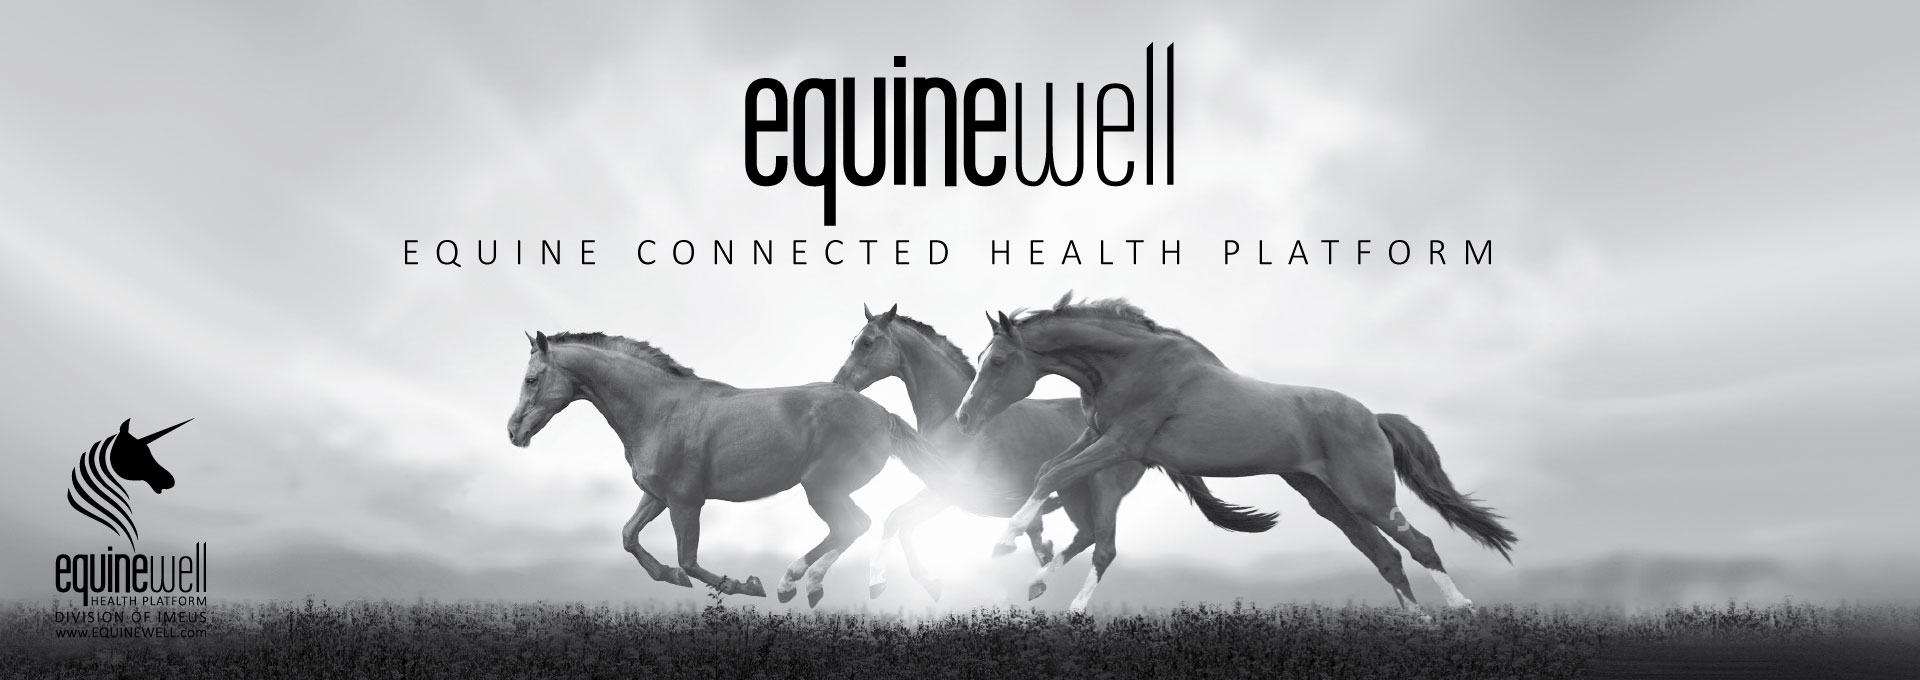 equinewell Connected Equine Information System